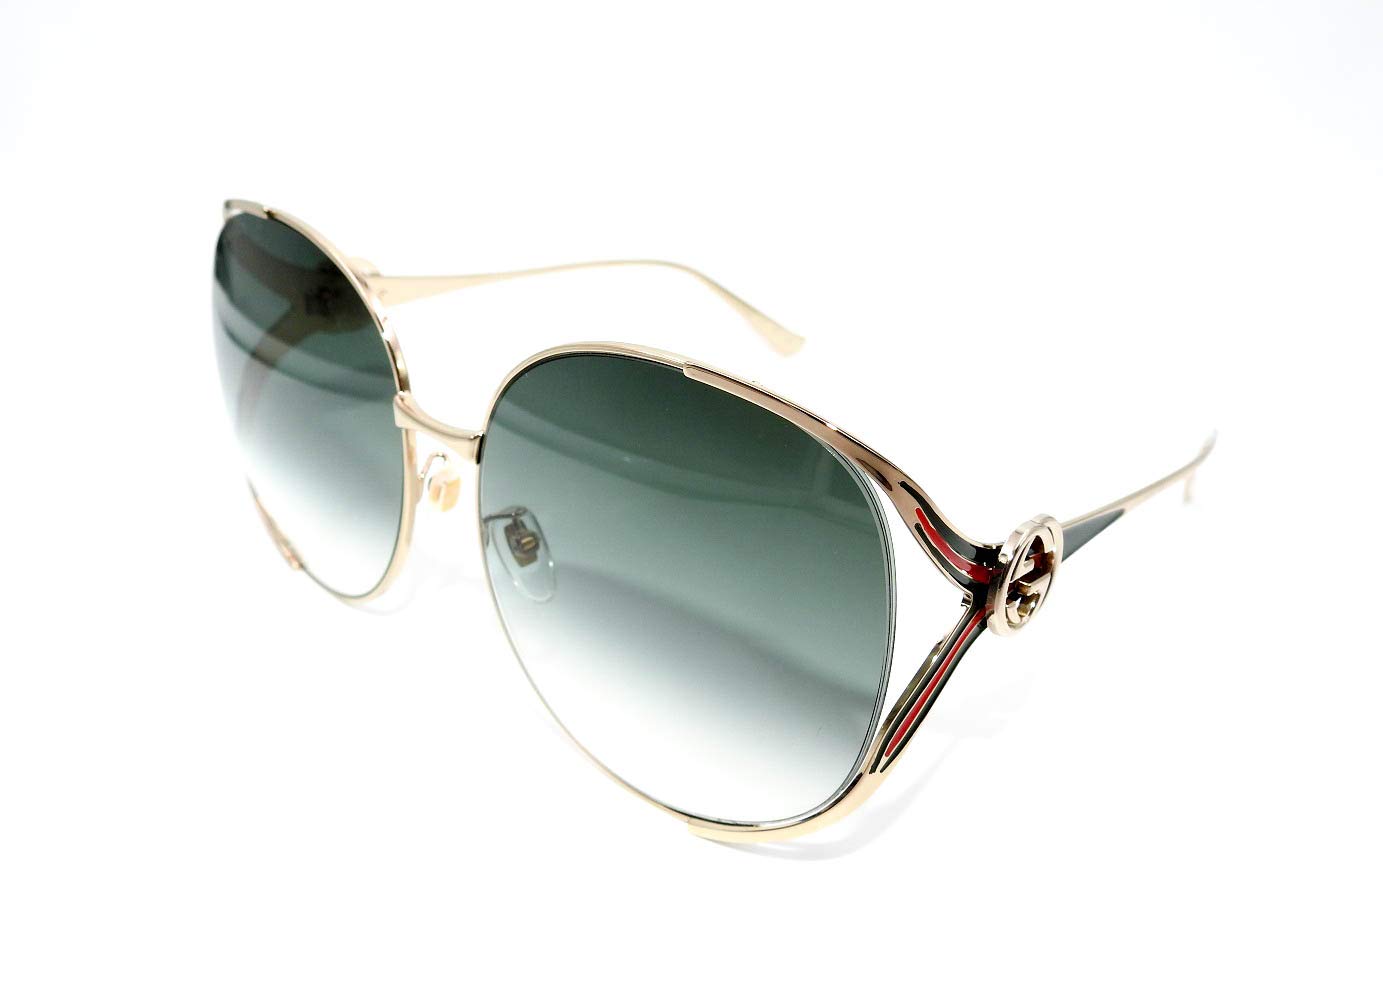 Gucci GG0225S 003 Gold/Green GG0225S Round Sunglasses Lens Category 2 Size 63